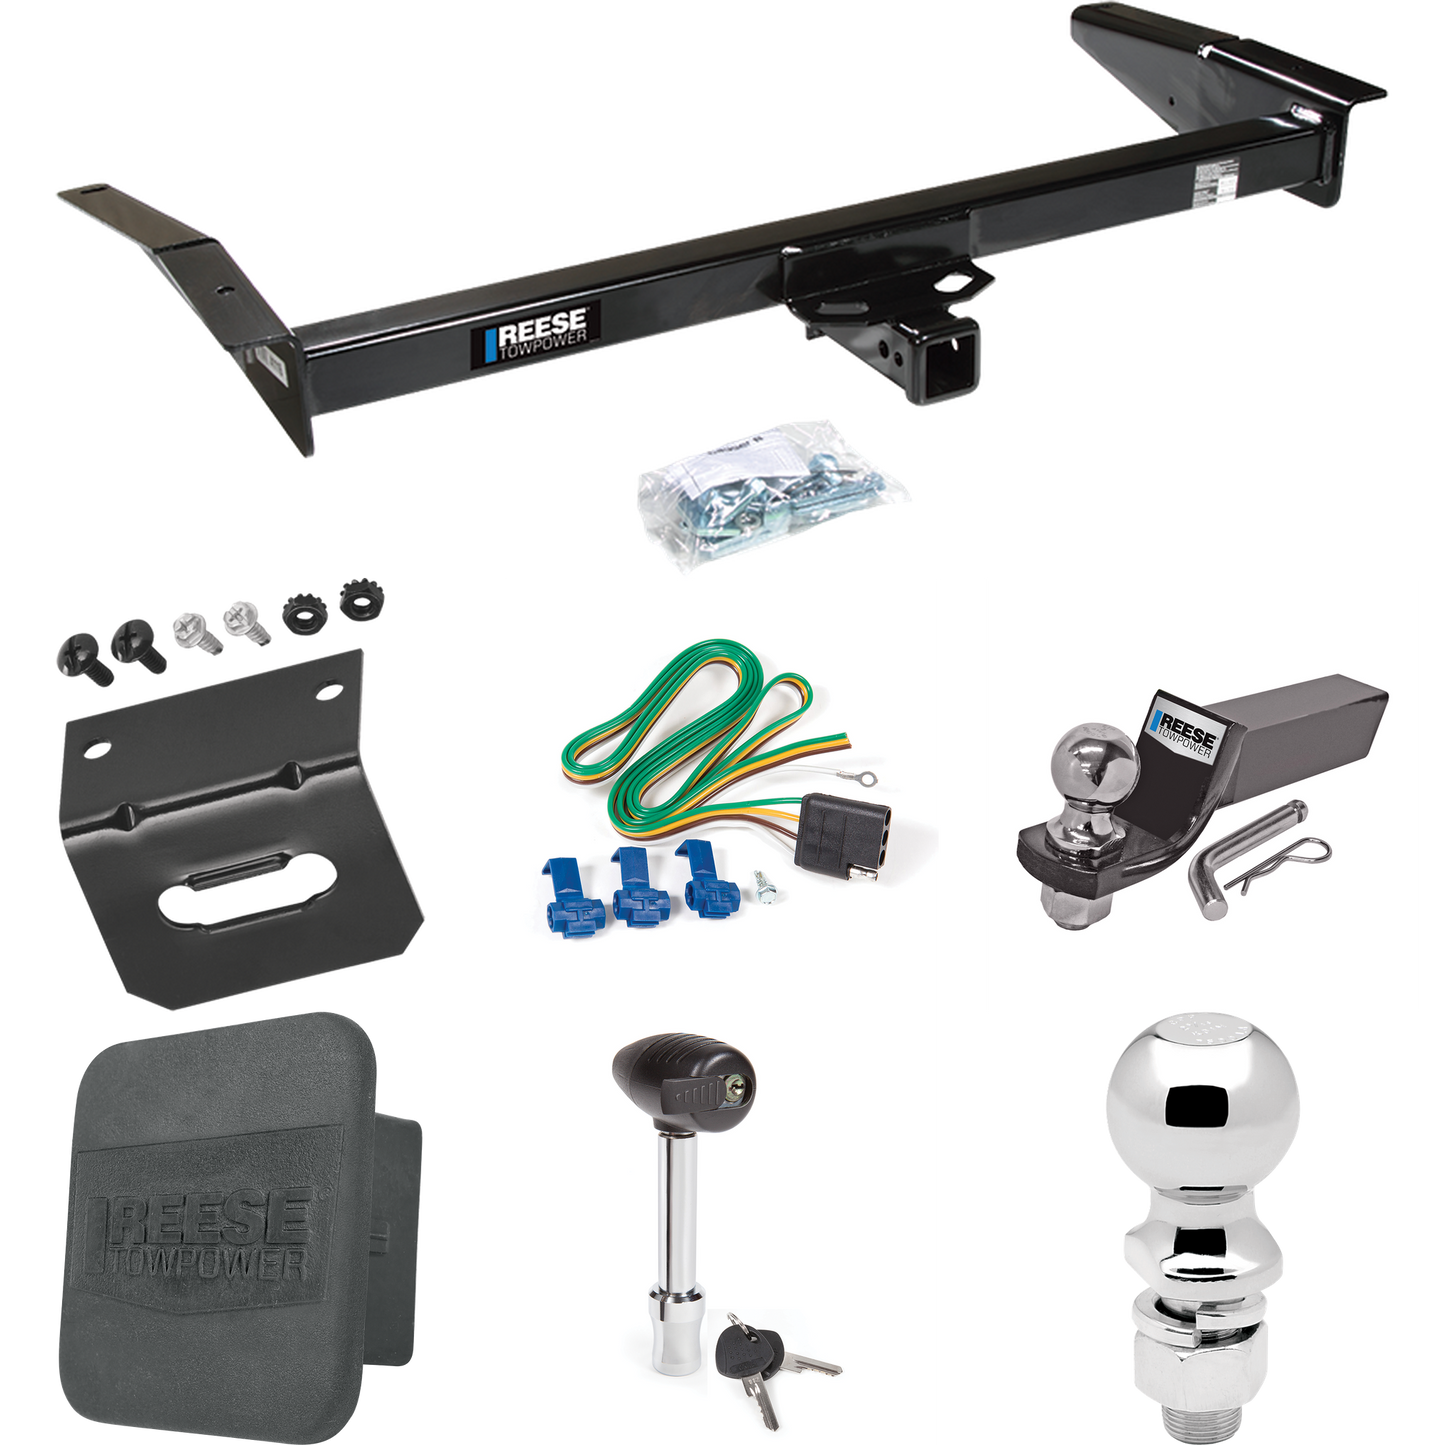 Fits 1980-1983 Lincoln Mark VI Trailer Hitch Tow PKG w/ 4-Flat Wiring + Starter Kit Ball Mount w/ 2" Drop & 2" Ball + 2-5/16" Ball + Wiring Bracket + Hitch Lock + Hitch Cover By Reese Towpower